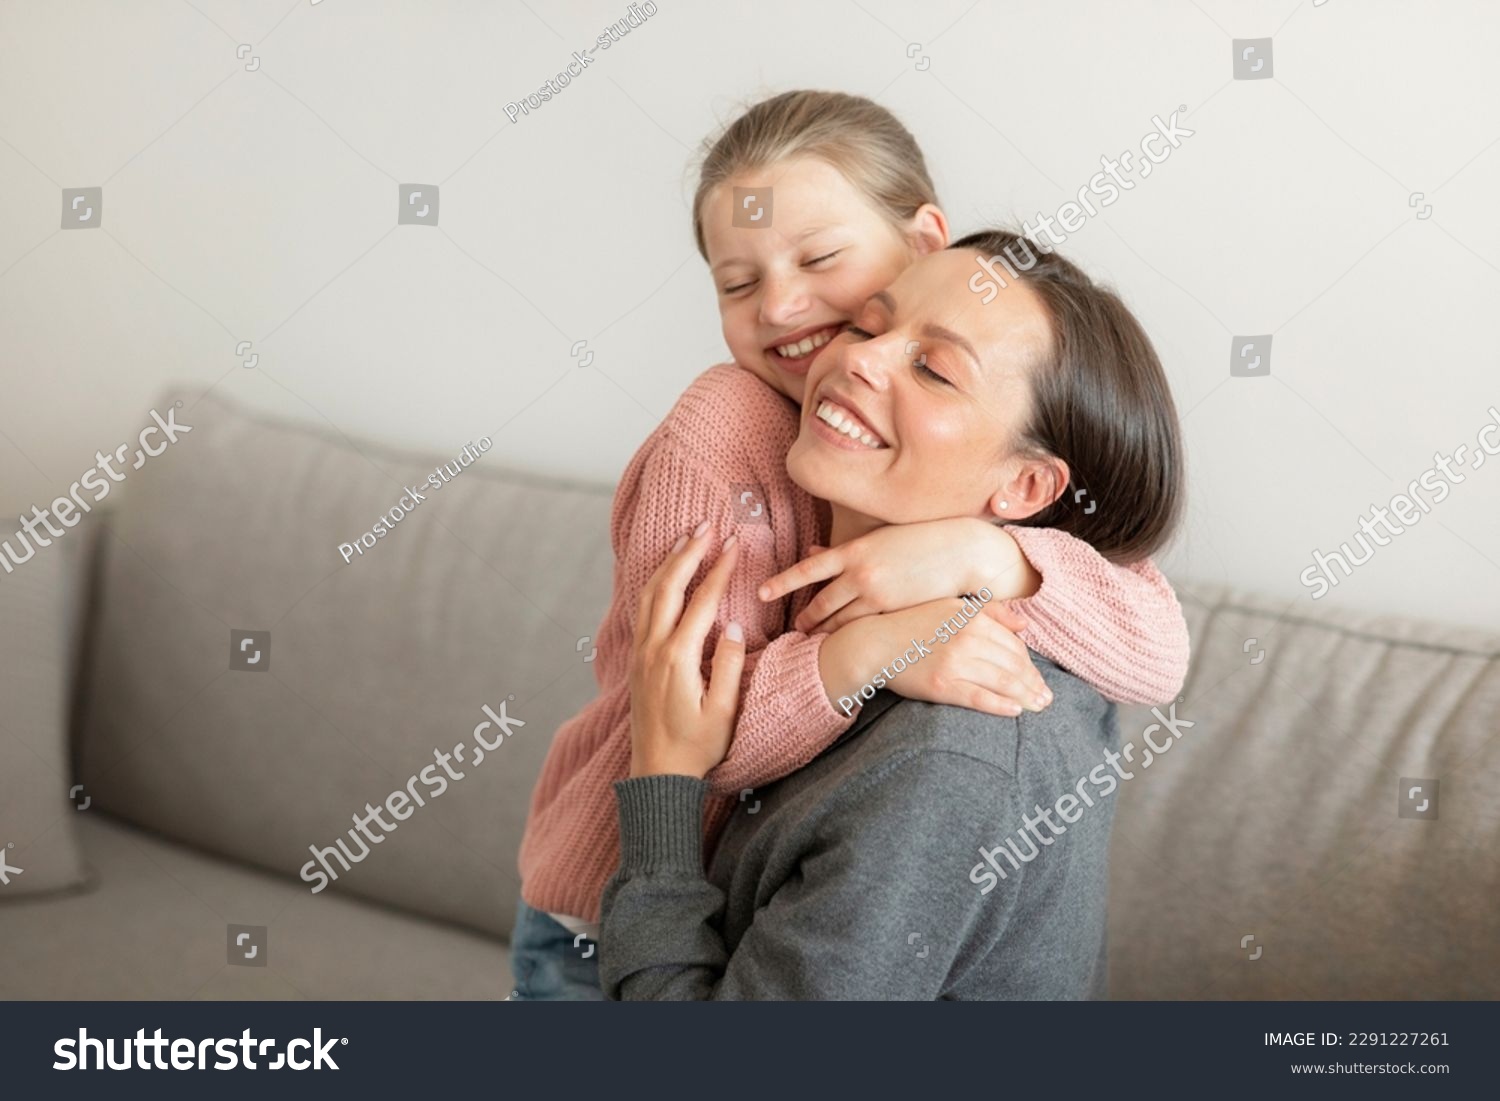 Cheerful happy cute european teen girl hugging millennial mom, have fun, enjoy spare time in living room interior, free space. Love, support, care and relationships at home #2291227261